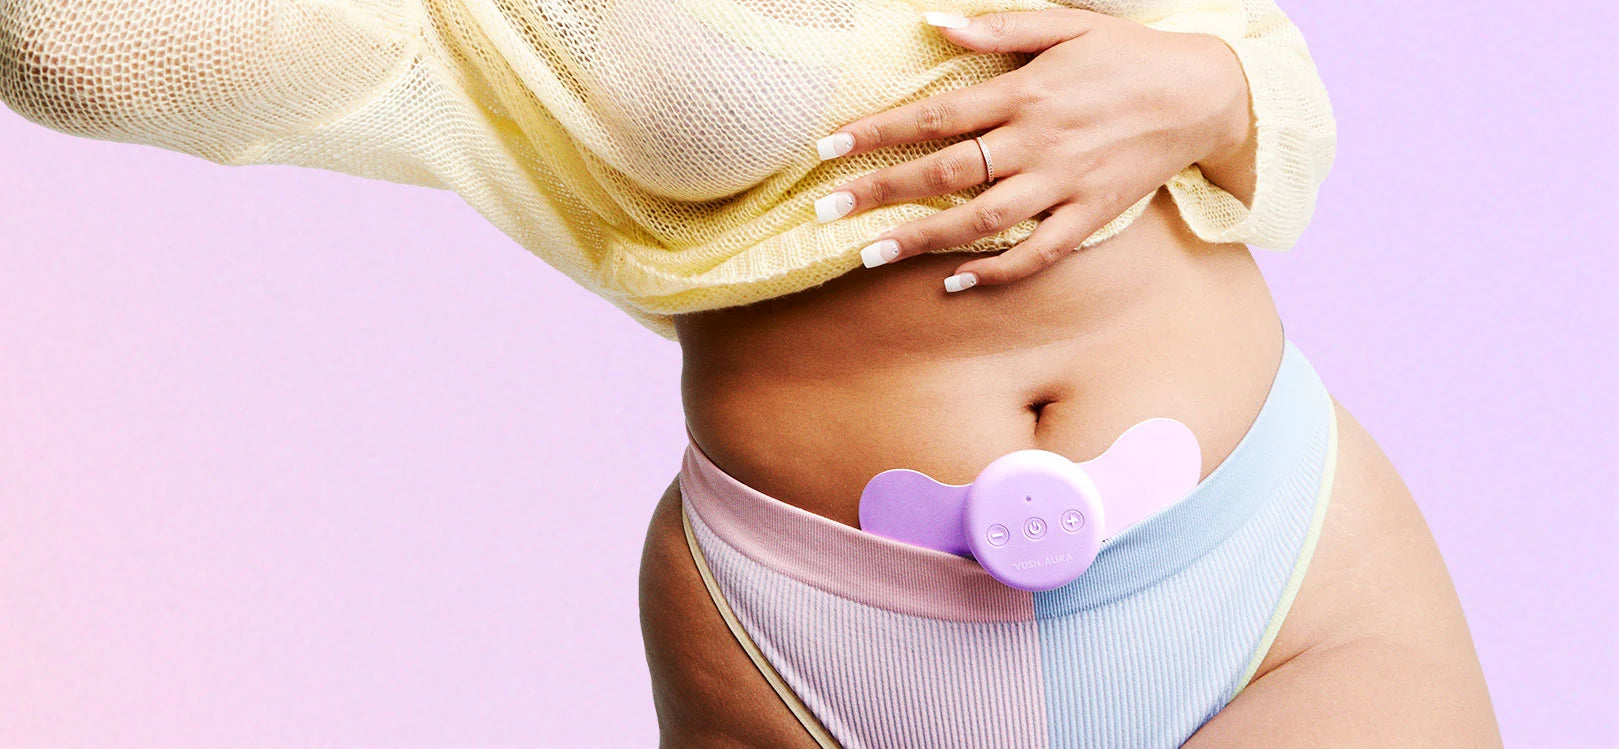 Mid shot of person's midrift wearing blue and purple underwear and cropped yellow jumper with VUSH Aura purple pain relief device on lower stomach against purple/pink gradient background